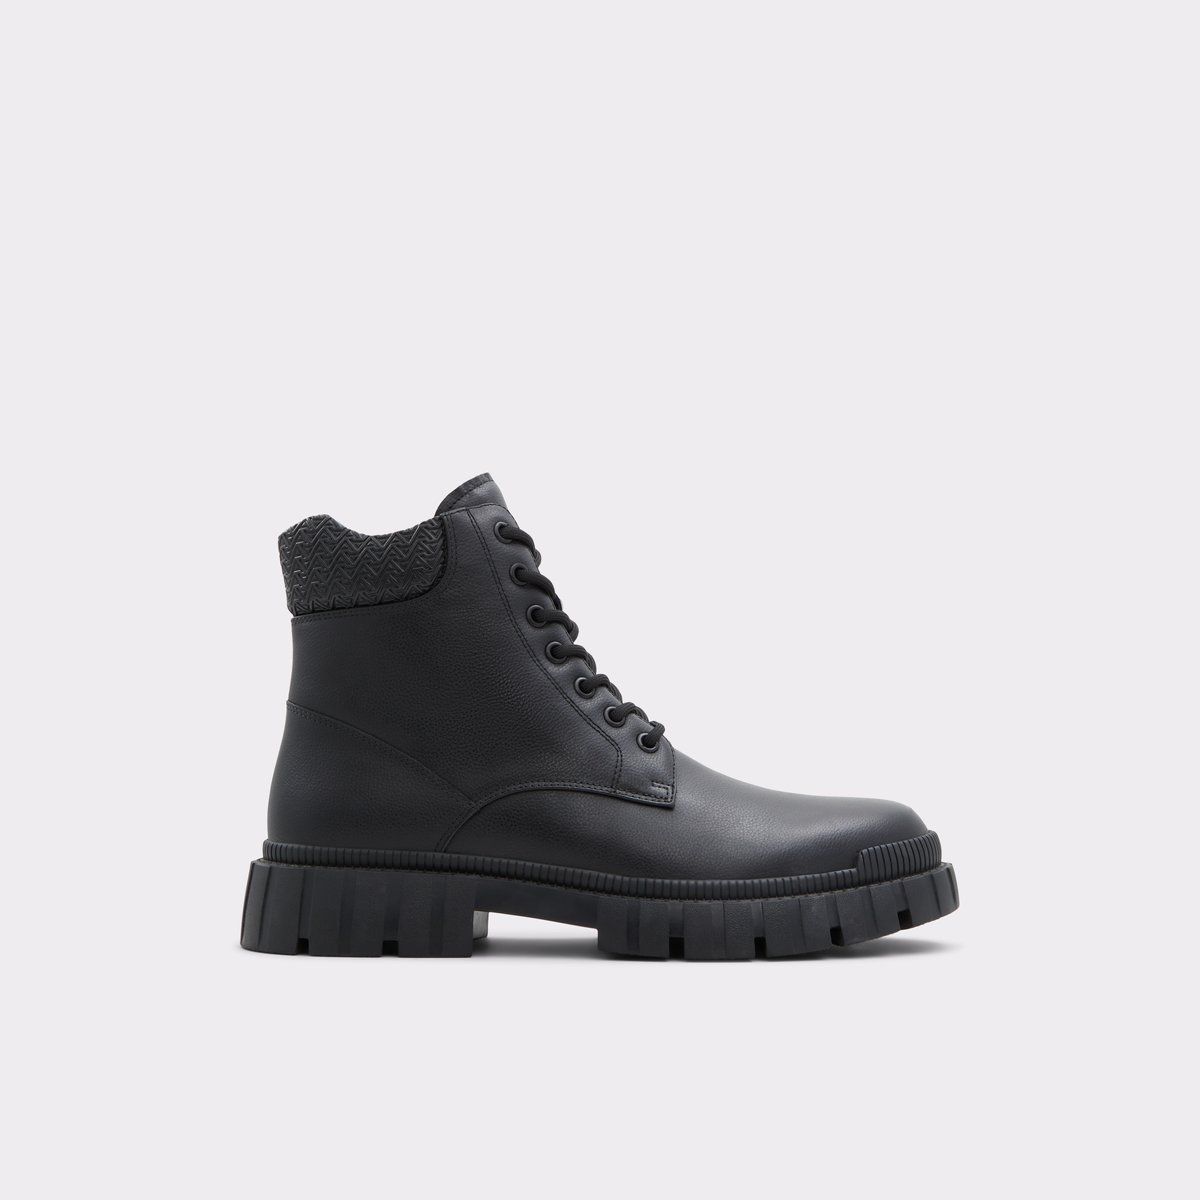 Newfield Black Leather Smooth Men's Winter boots | ALDO Canada